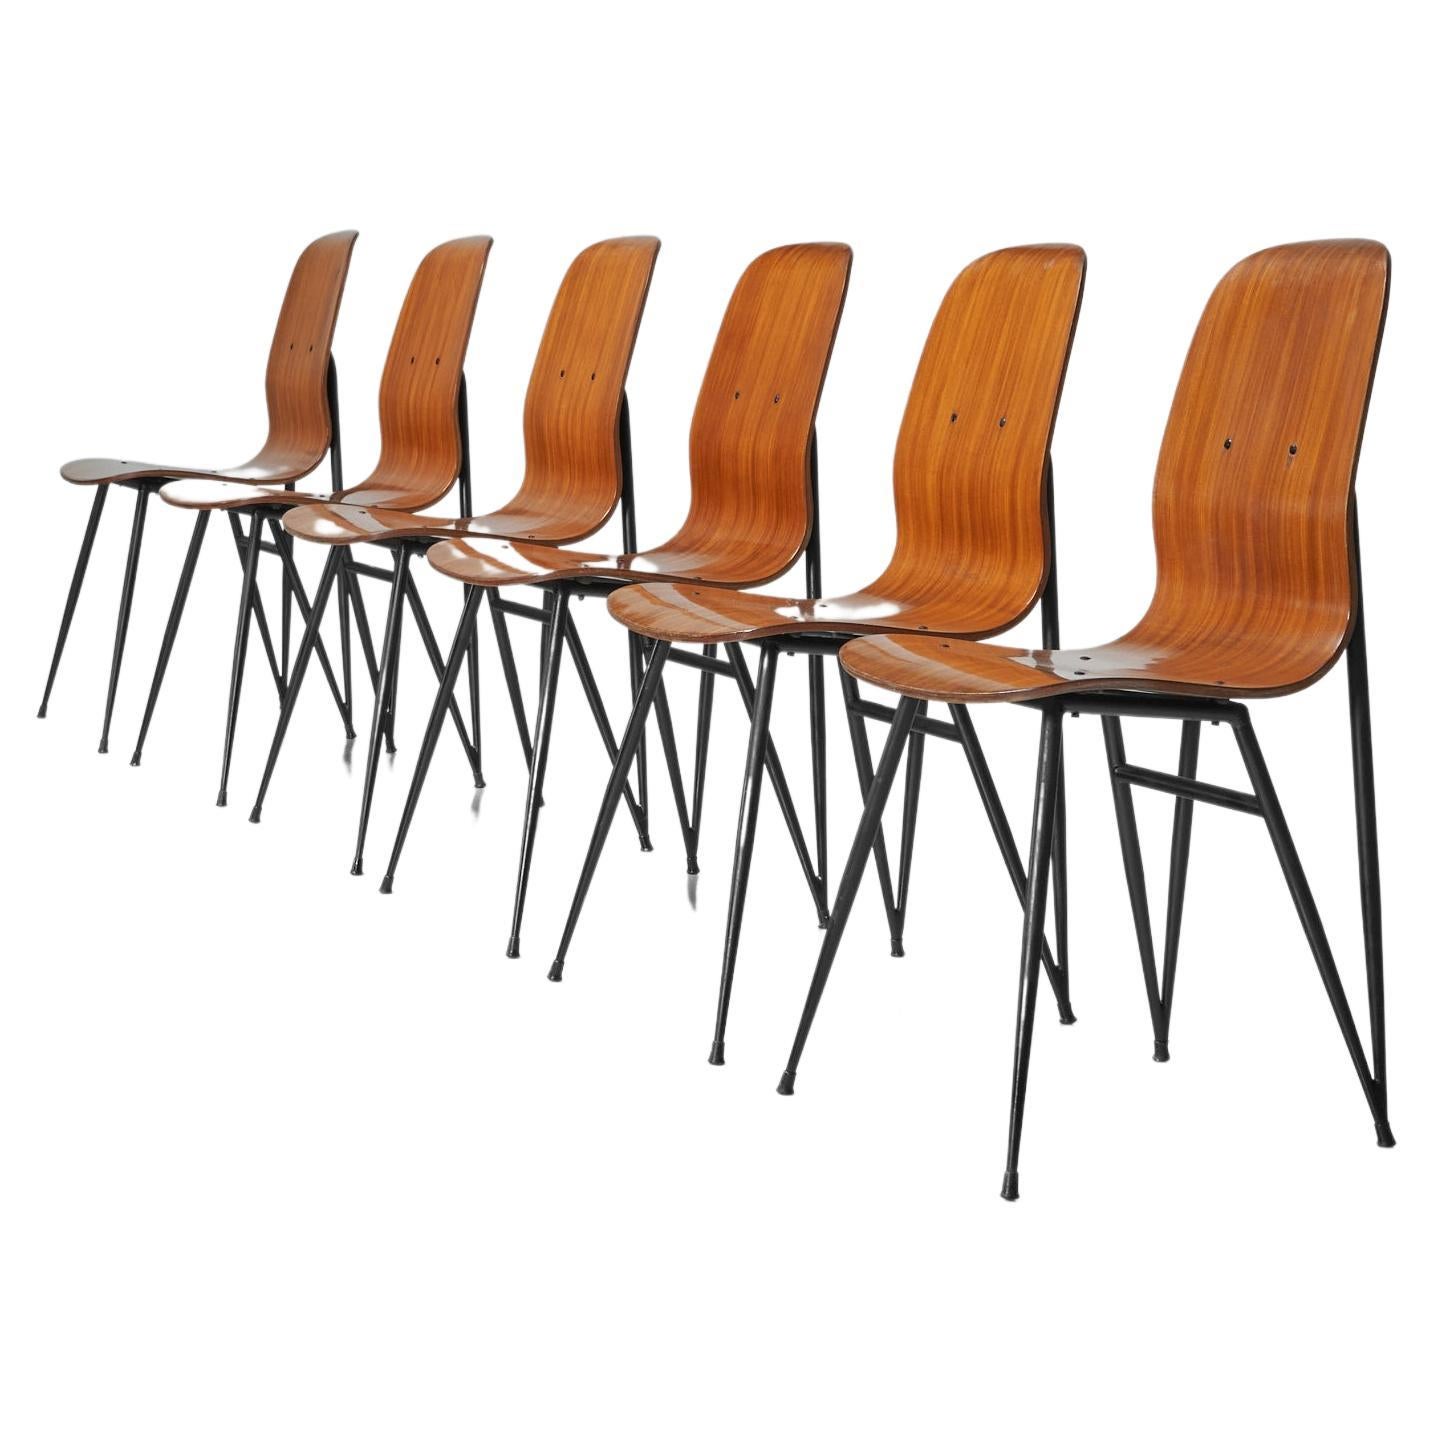 Enzo strada dining chairs Mobili Barovero Italy 1950 For Sale